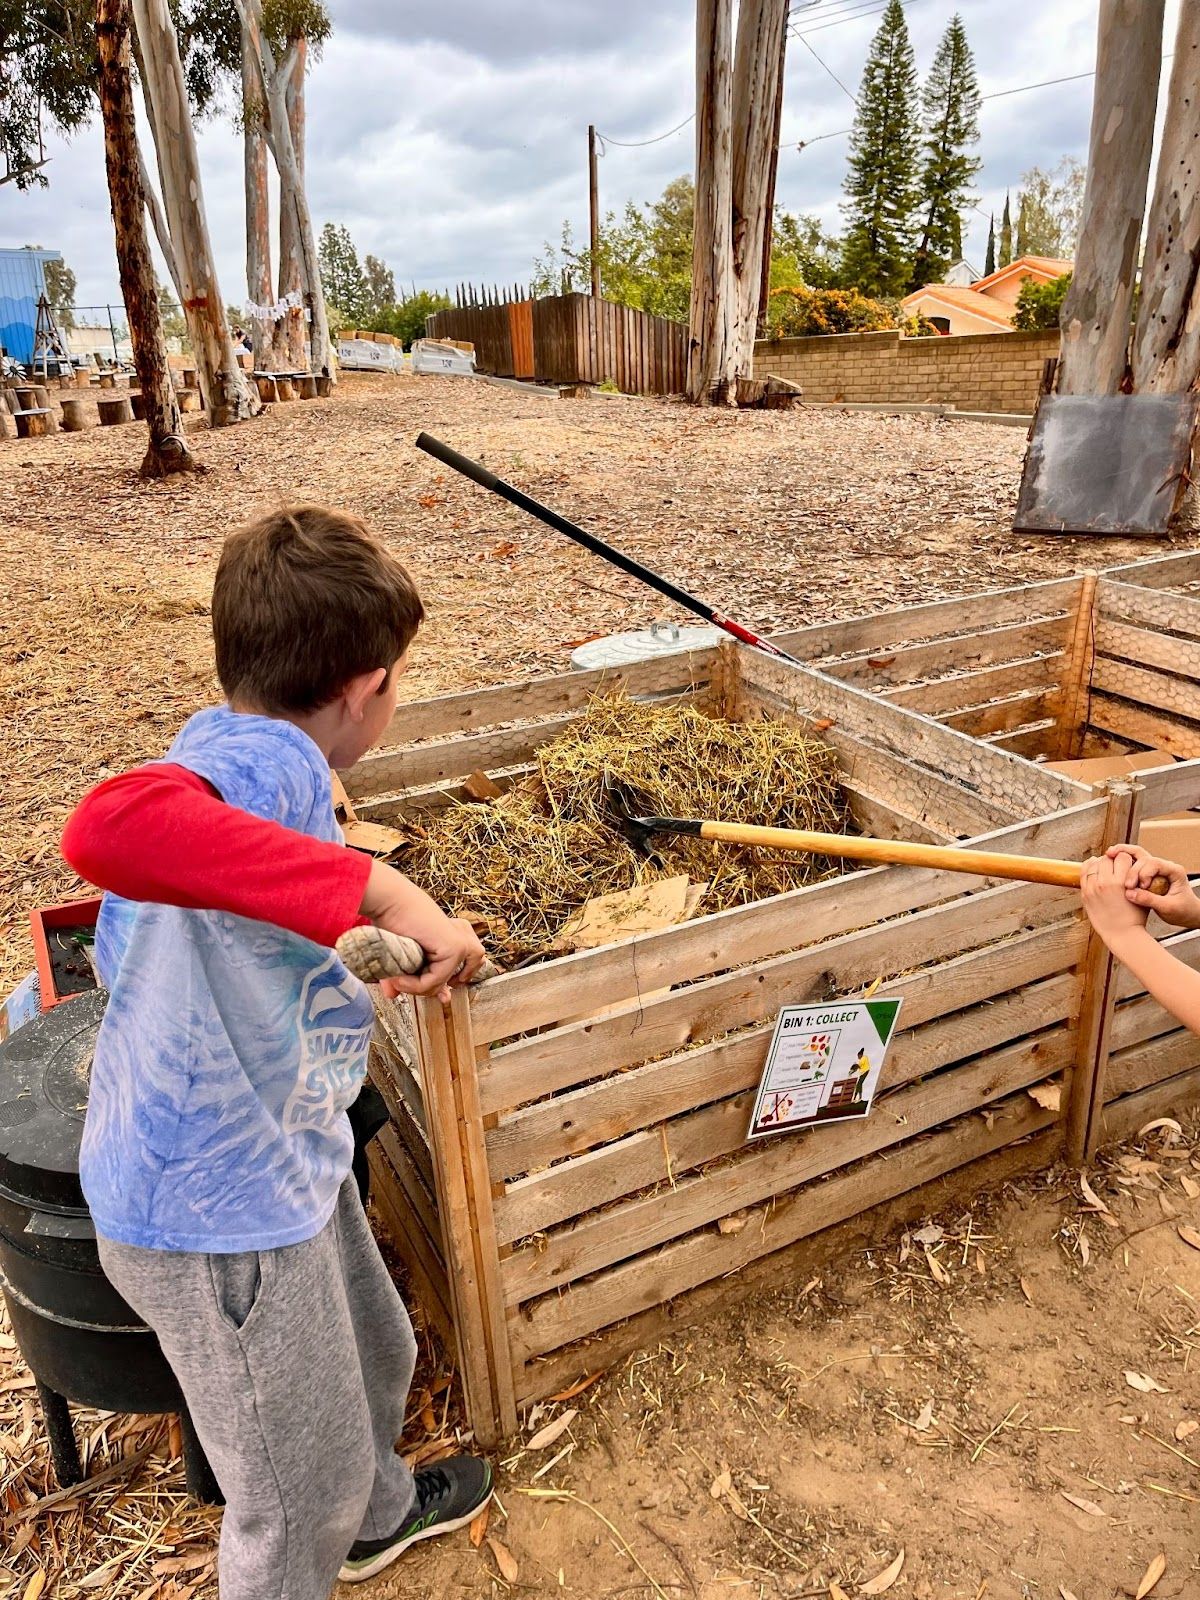 Students at Santiago STEAM Magnet tend to one of three composting stations located on campus. Photo by Jeannette Andruss.